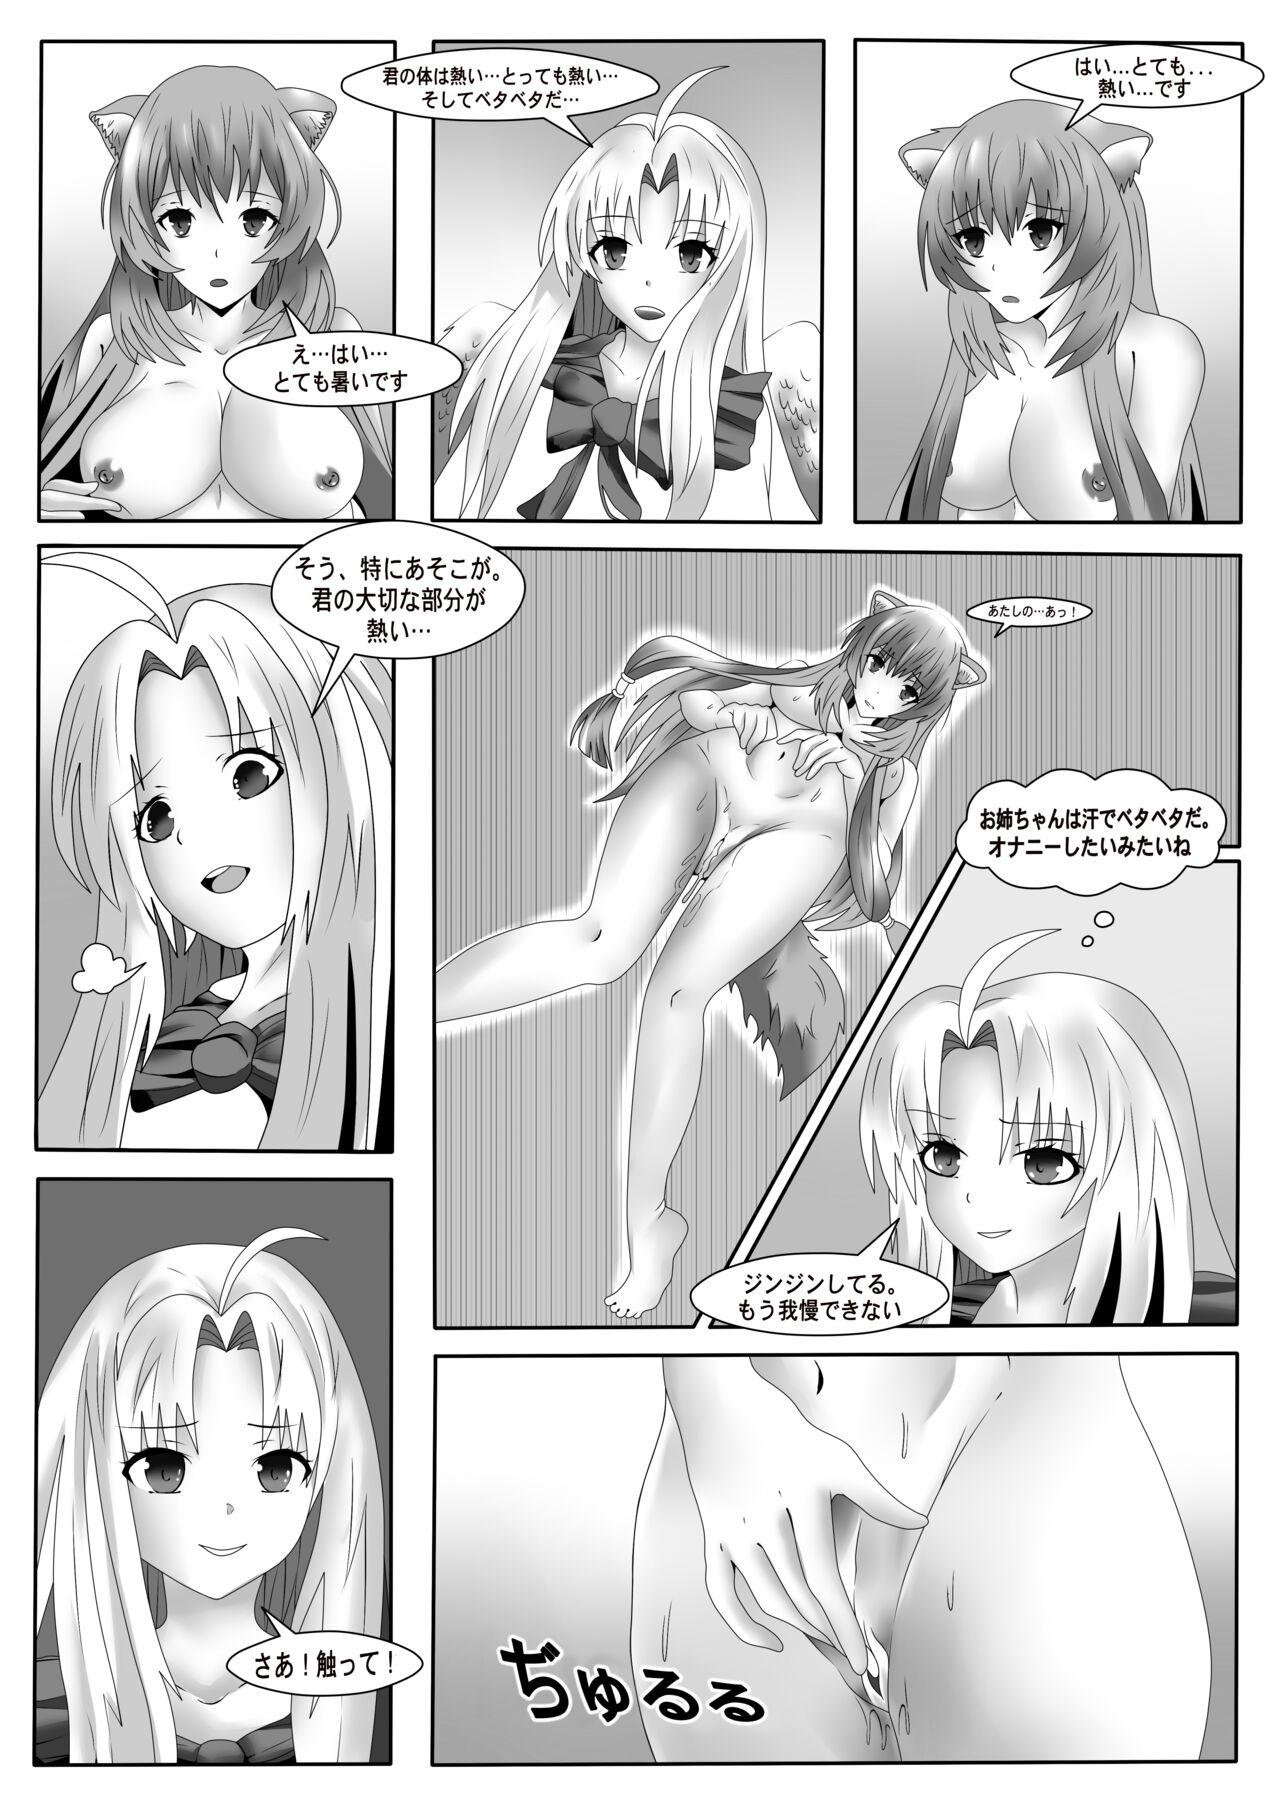 Young Tits The Rising Of The Shield Hero - Happy Point with My Sister and Teacher - Tate no yuusha no nariagari | the rising of the shield hero Fake Tits - Page 7